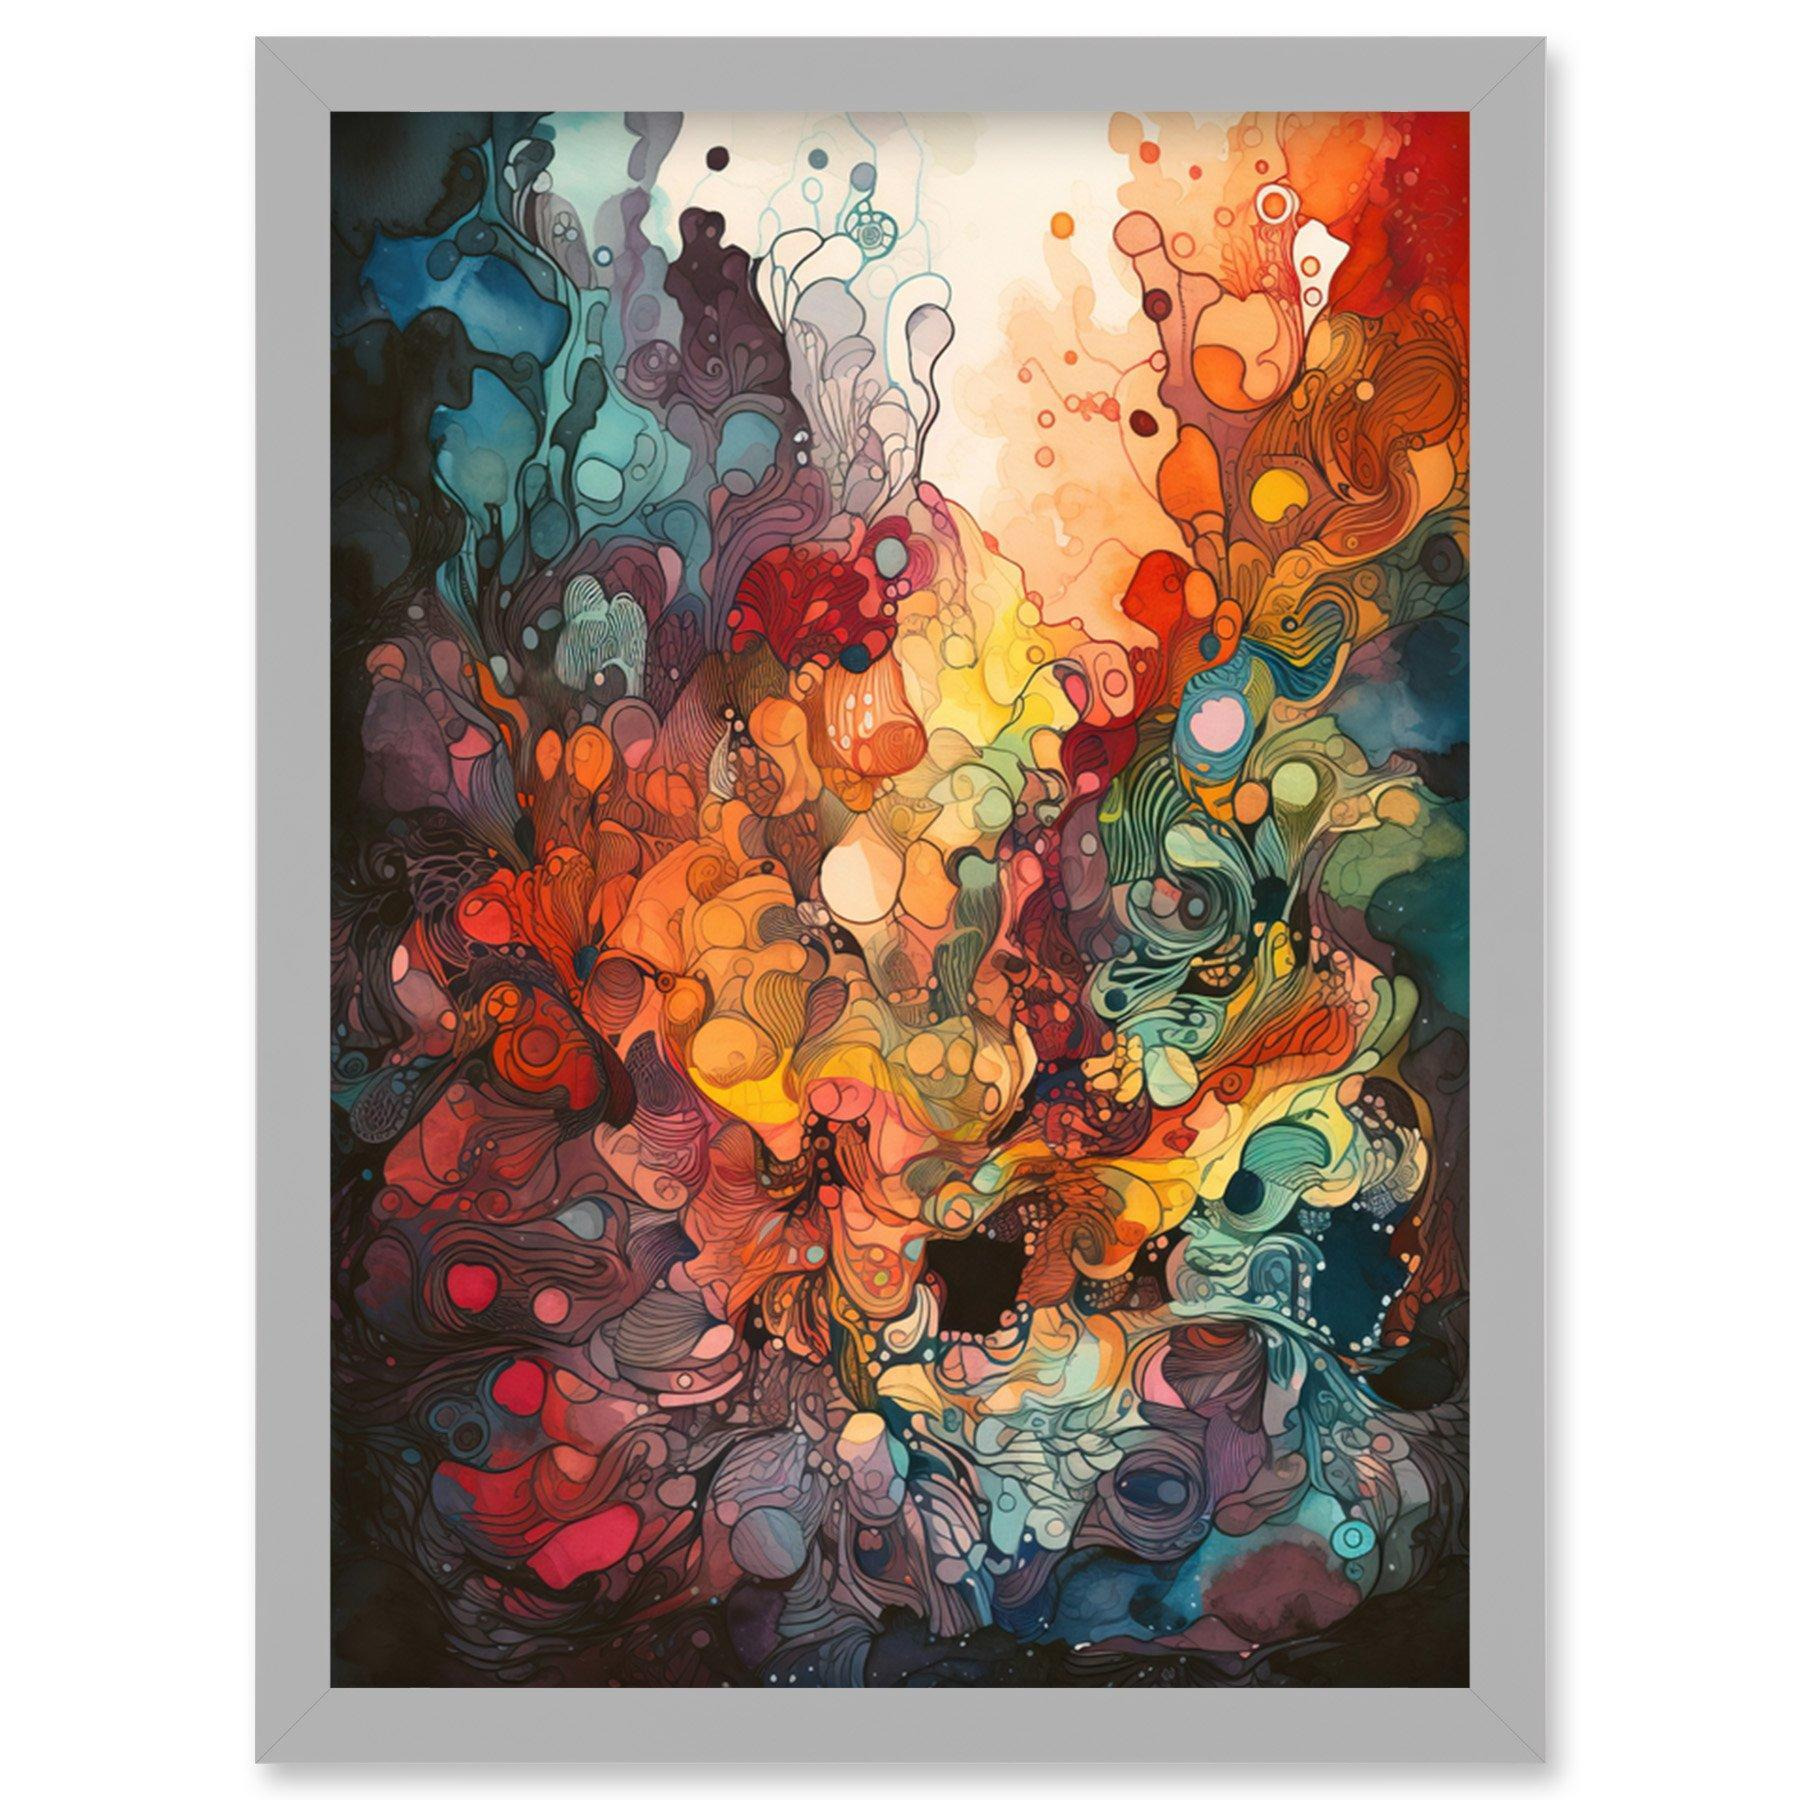 Abstract Coral Reef Organic Shapes Modern Rainbow Acrylic Colour Painting Artwork Framed Wall Art Print A4 - image 1